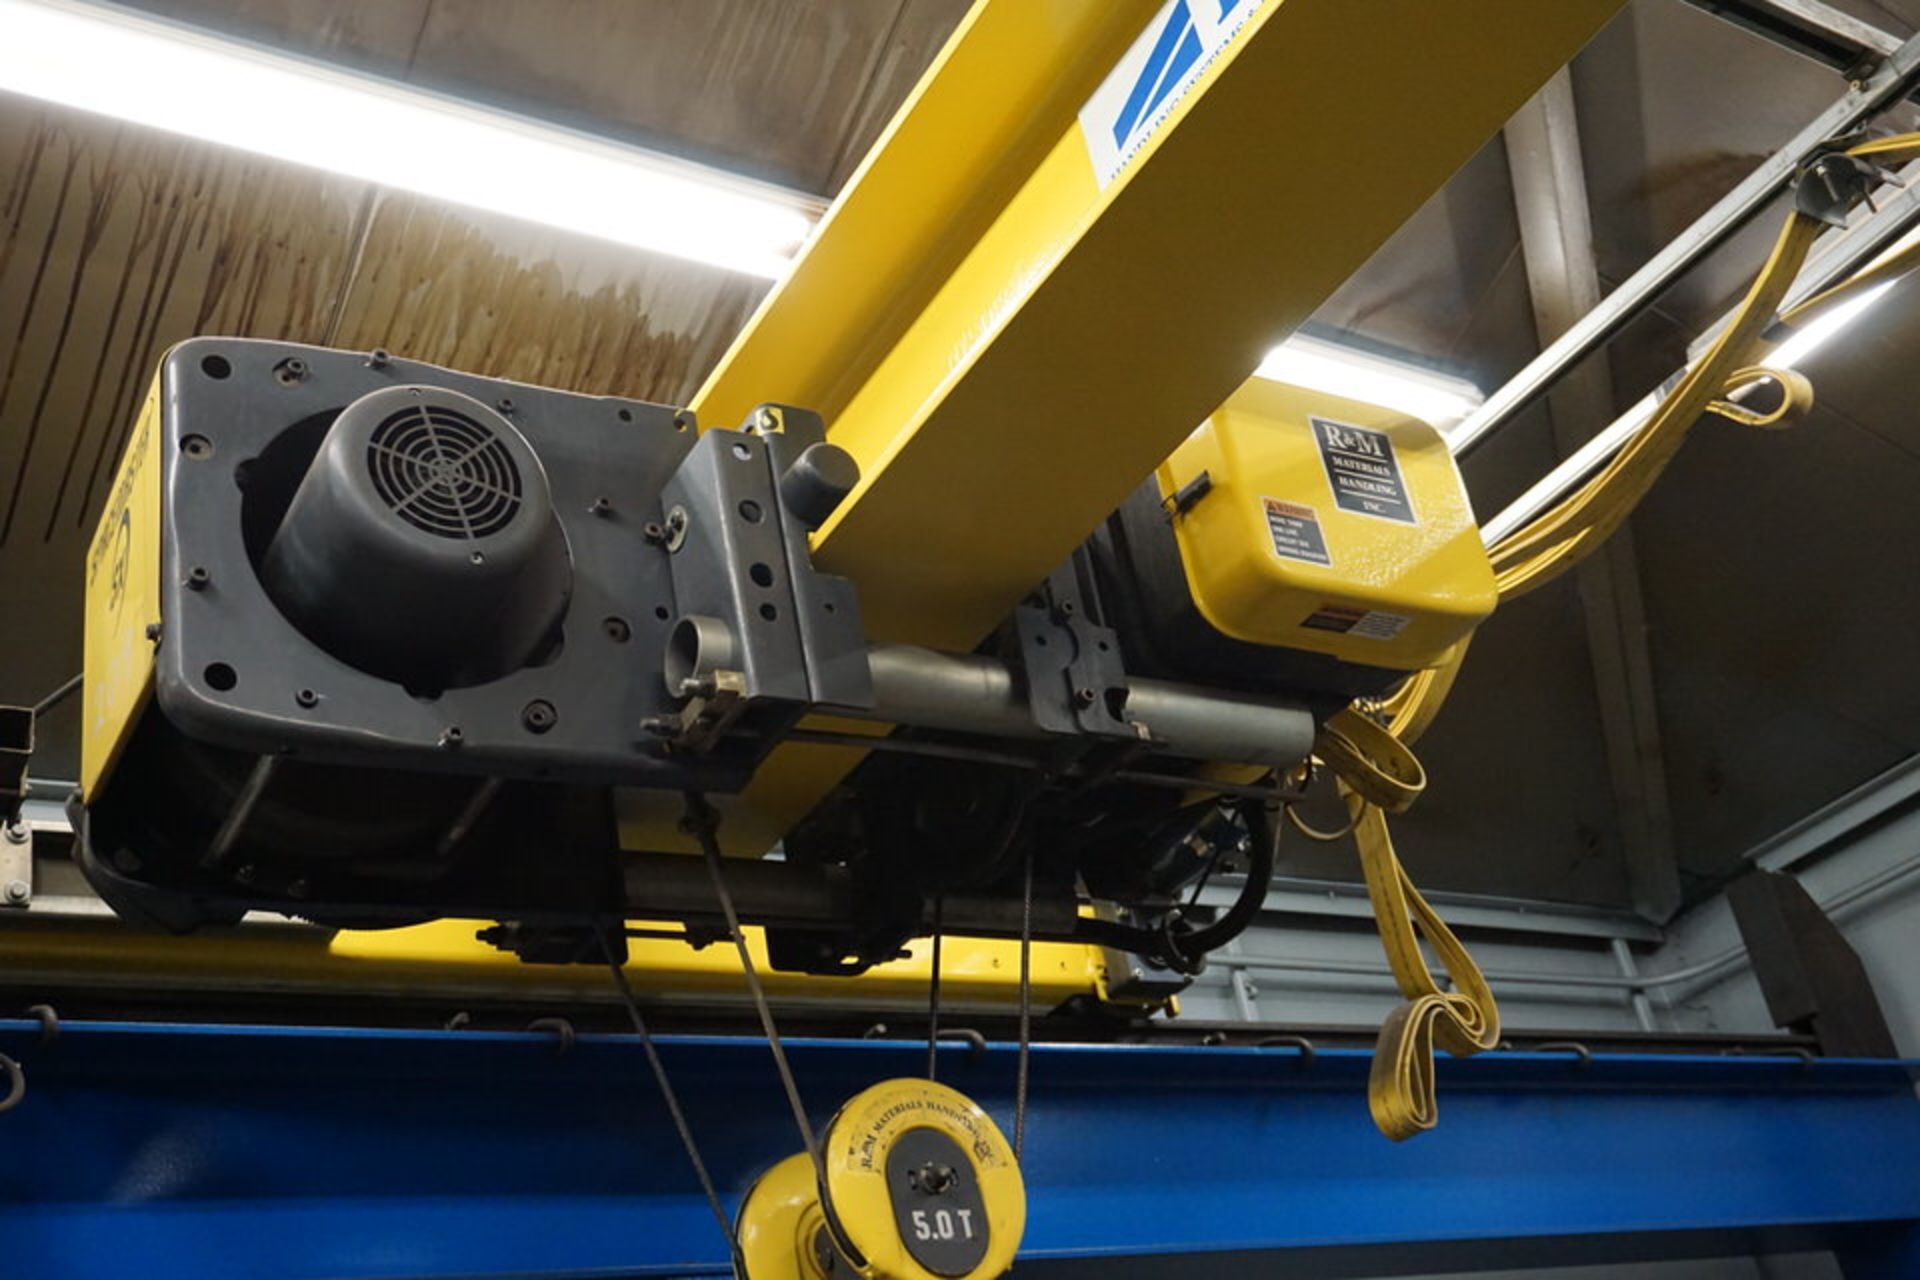 HSC COMPLETE SELF SUPPORTING BRIDGE CRANE SYSTEM, 5 TON ELECTRIC HOIST, APPROX 16' X 30' X 10' TALL - Image 3 of 5